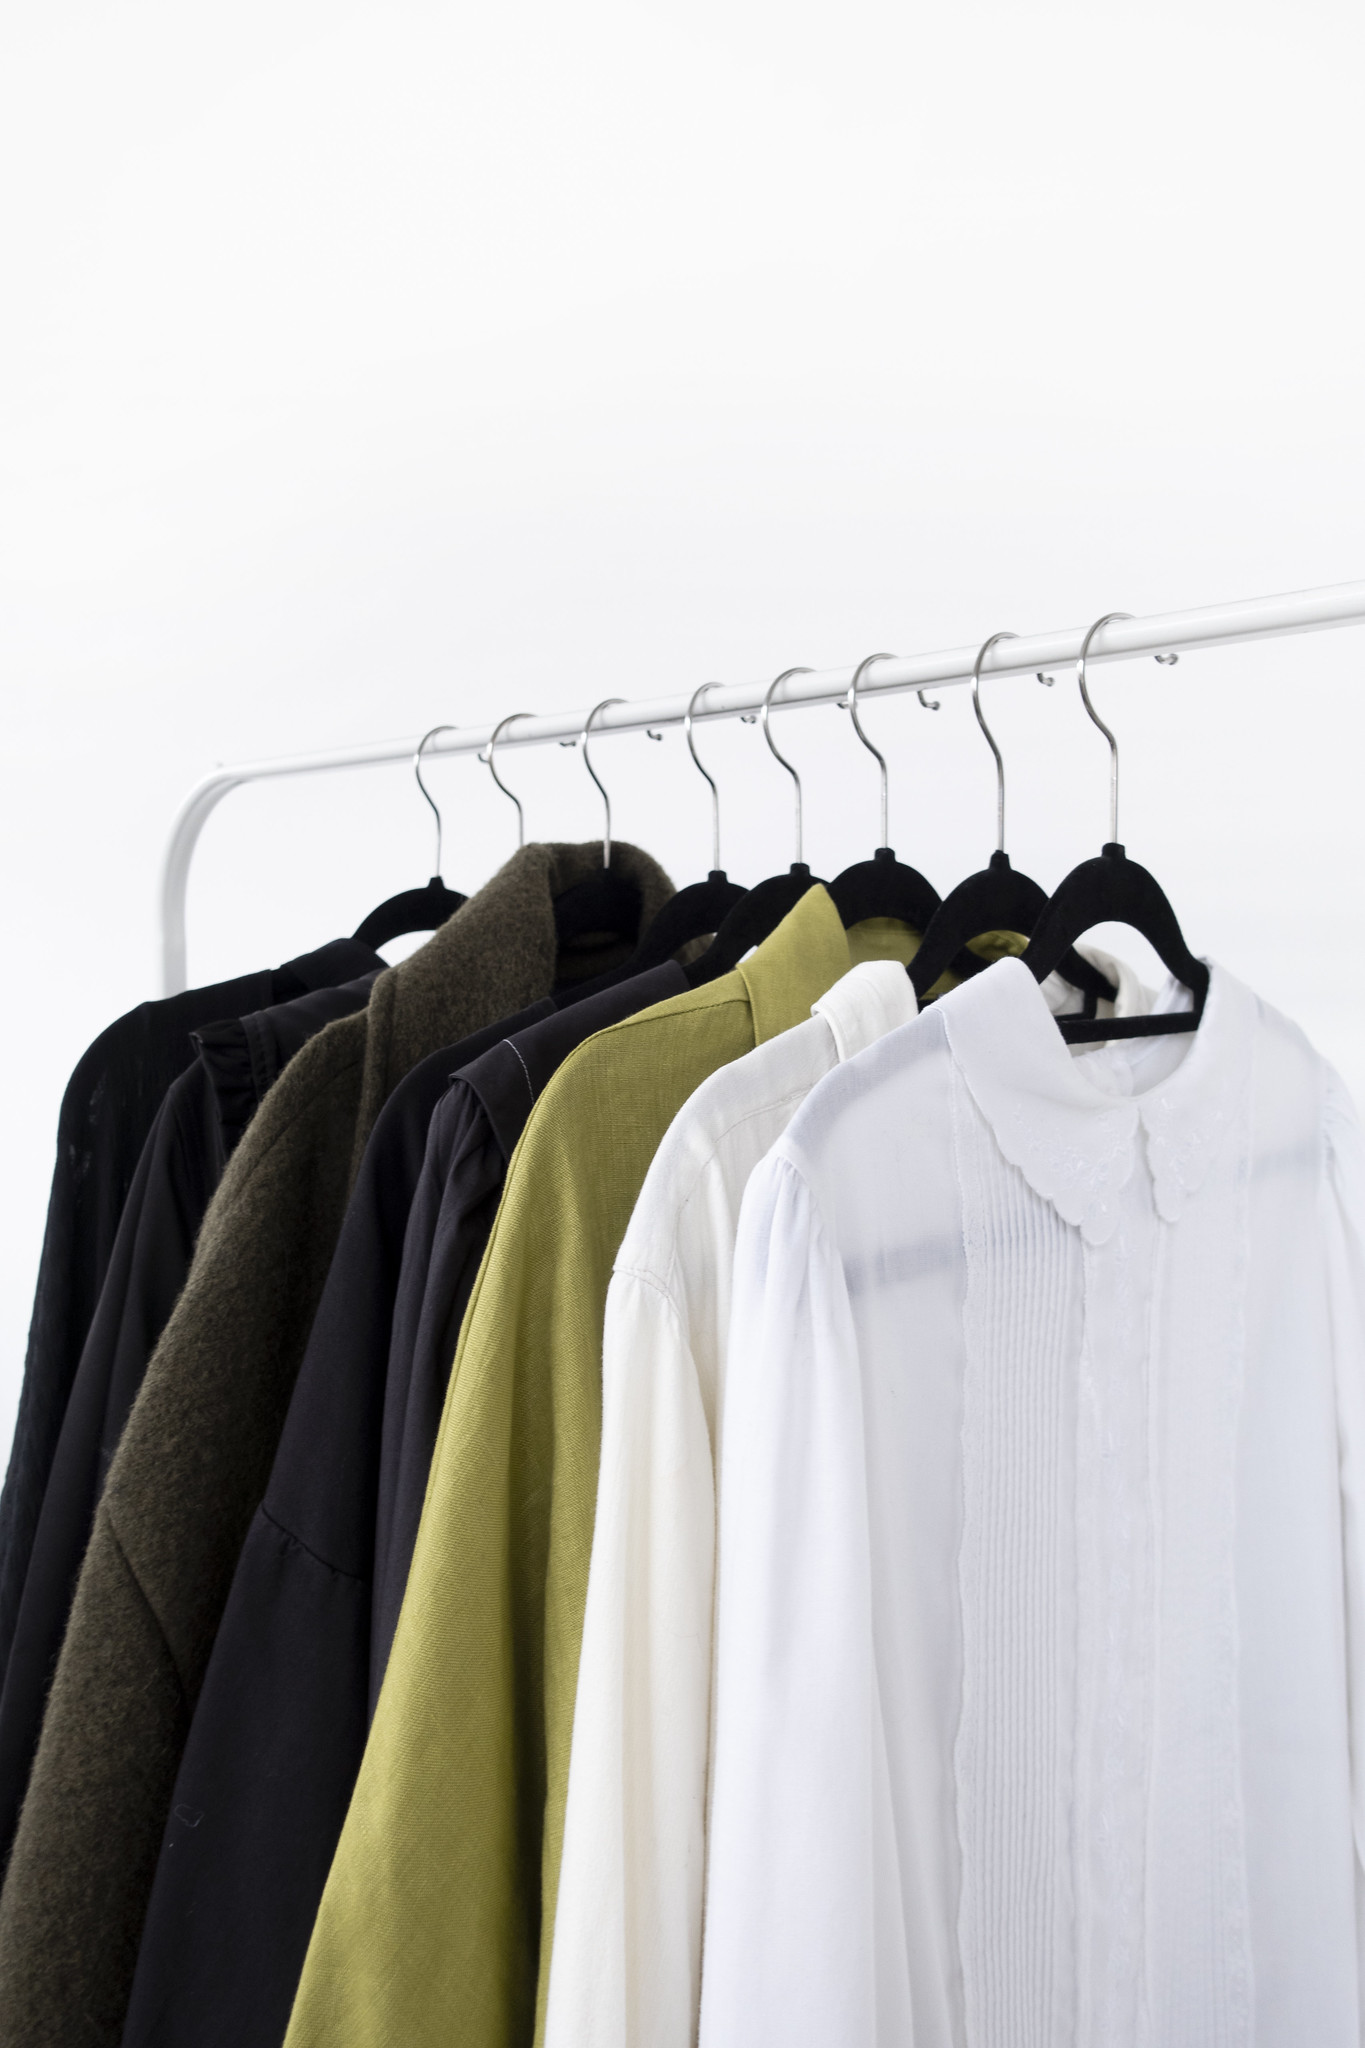 Eco-Friendly Tips for a Spring Wardrobe Refresh